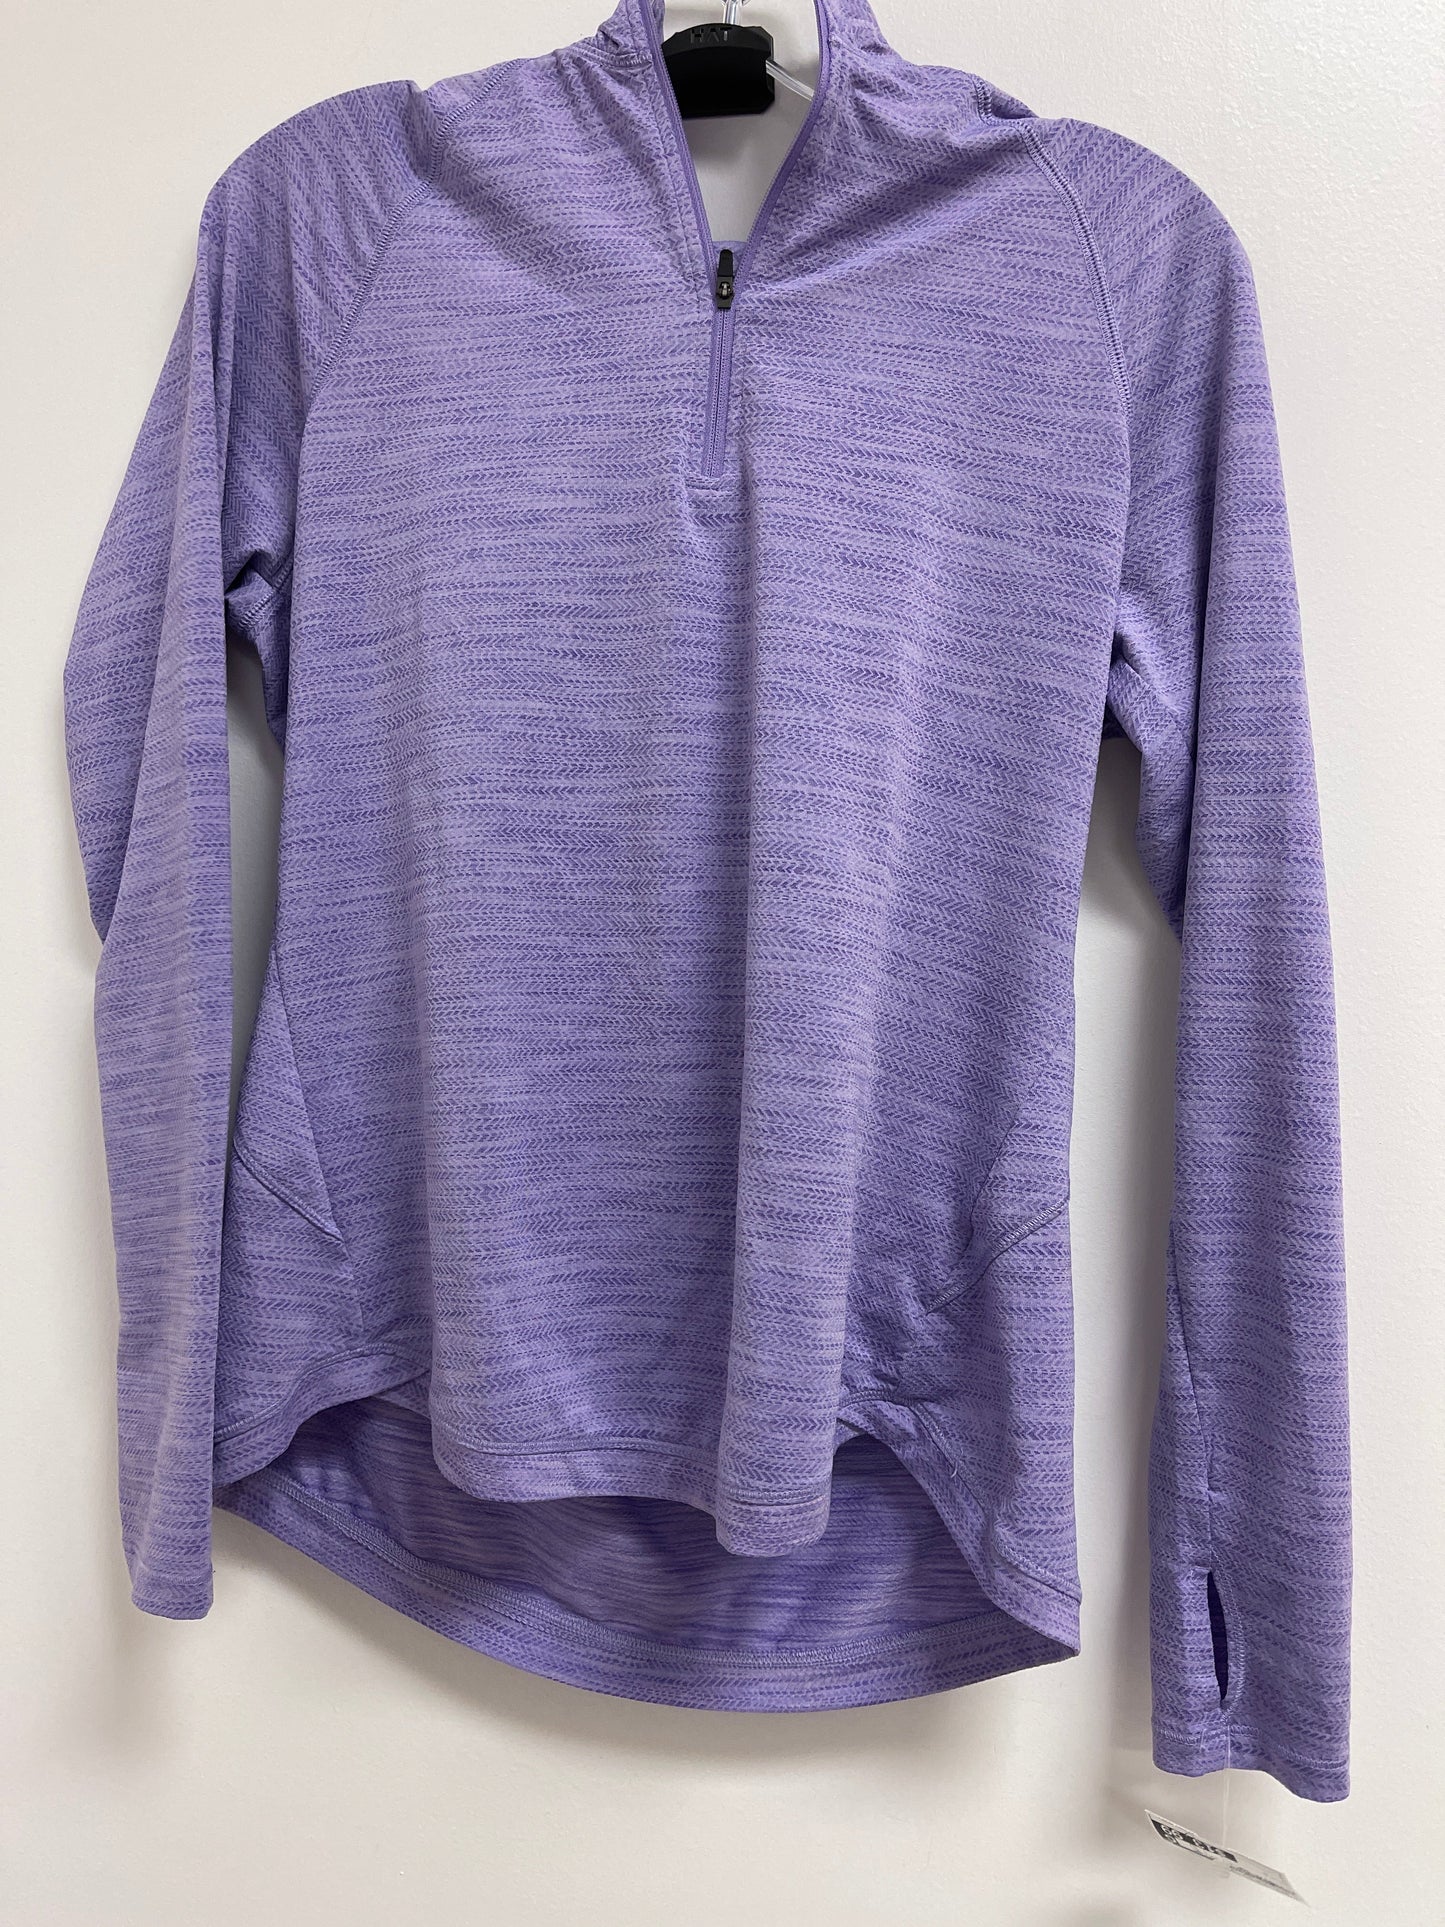 Purple Athletic Top Long Sleeve Collar Dsg Outerwear, Size S